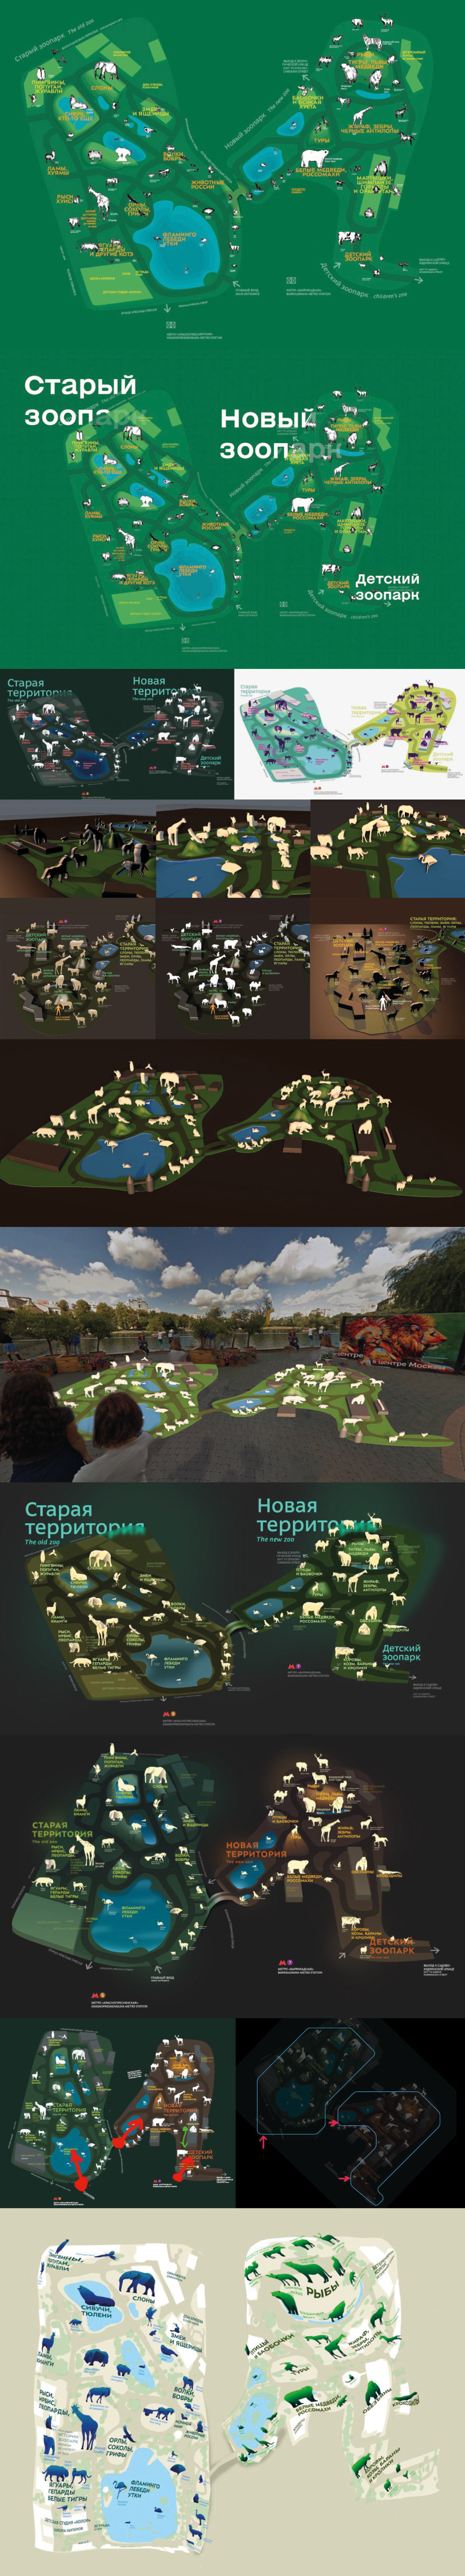 moscow zoo navigation process 11